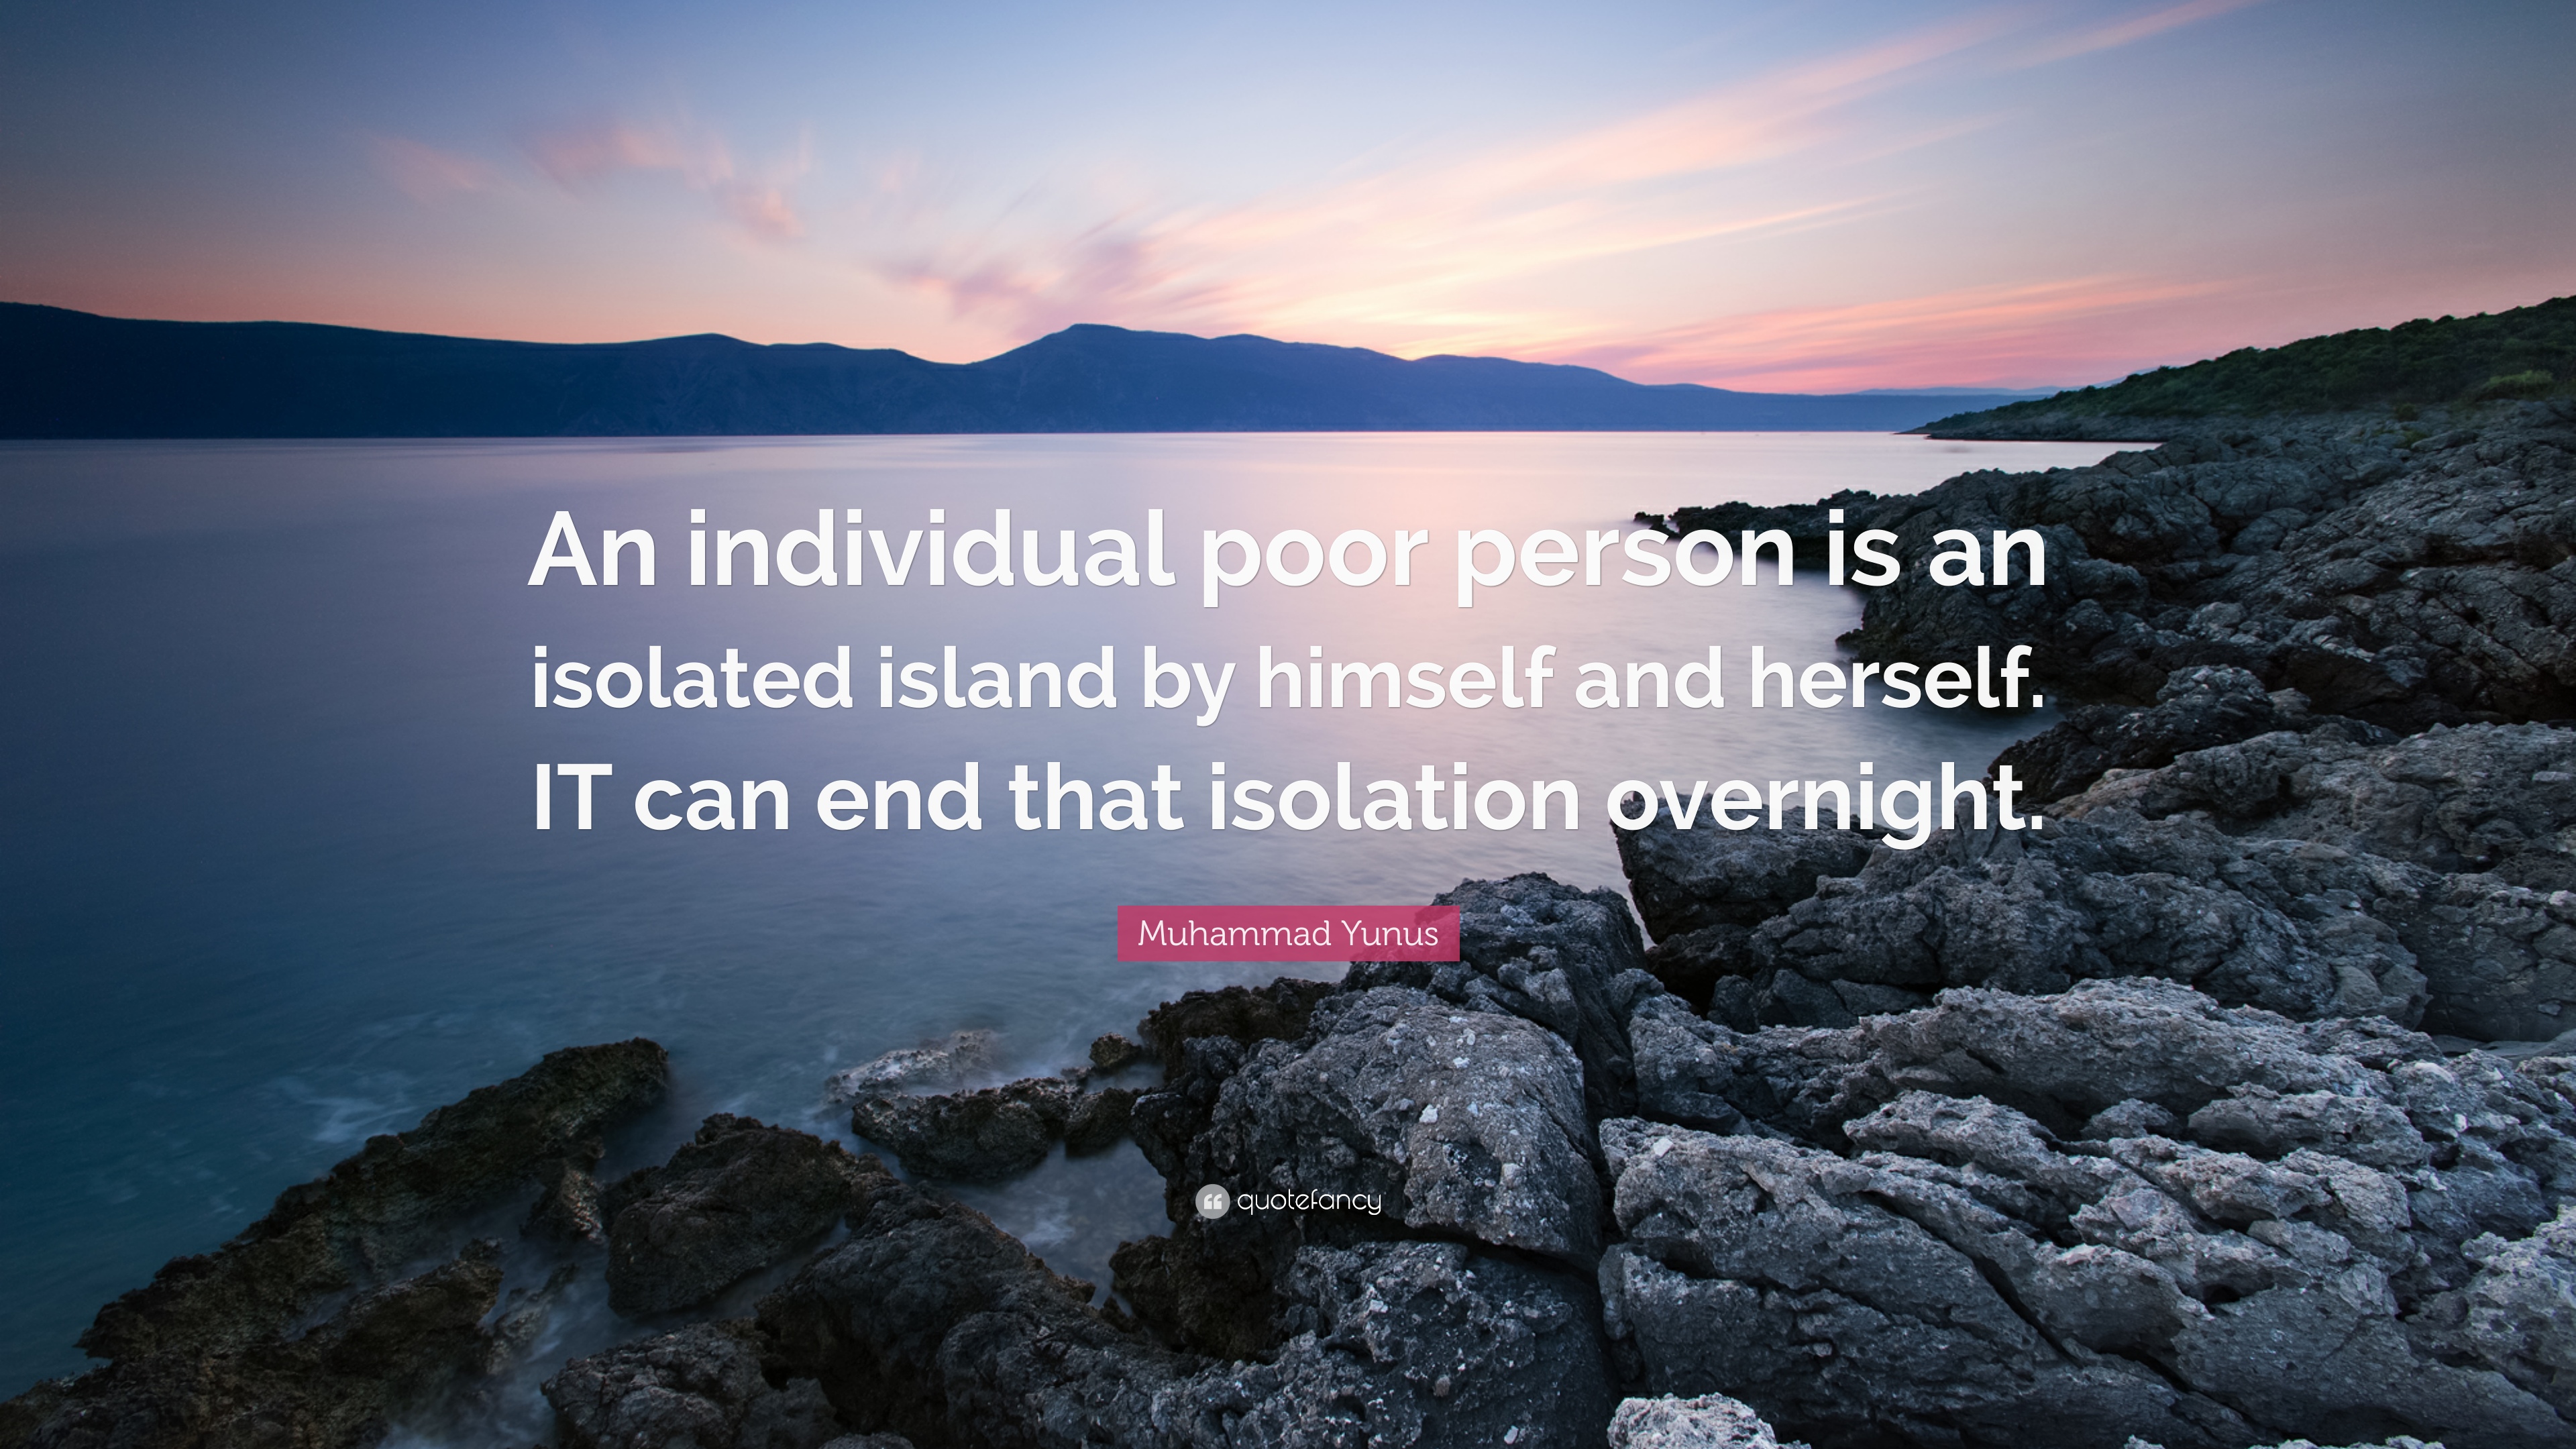 Muhammad Yunus Quote: “An individual poor person is an